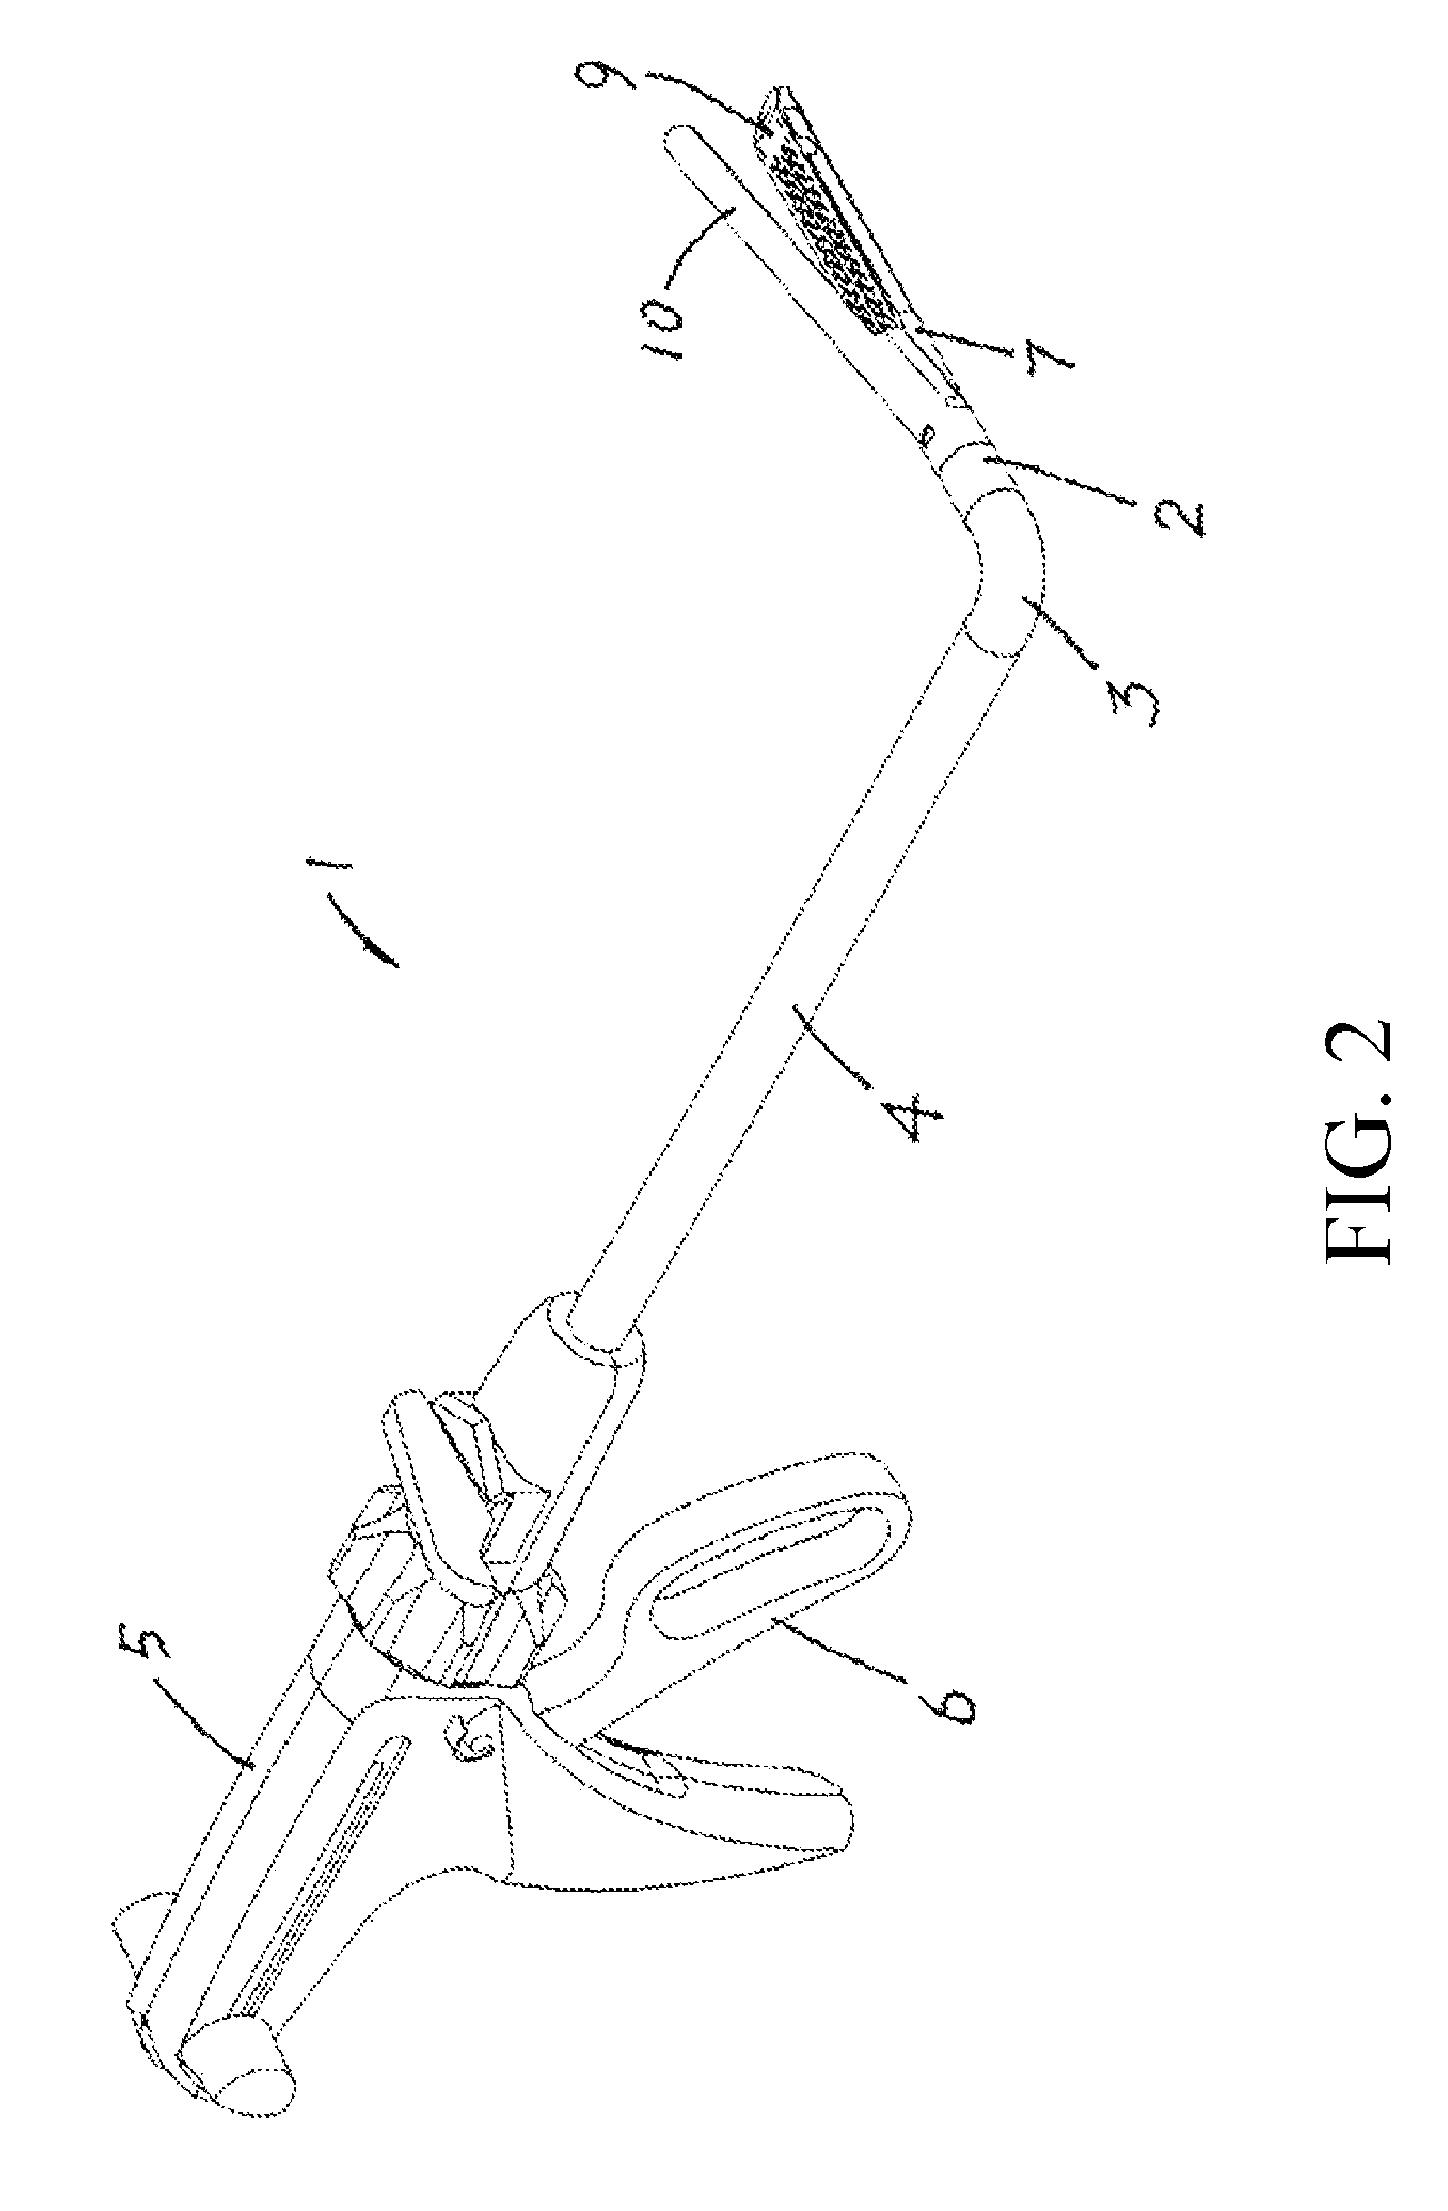 Endoscopic surgical cutting stapler with a chain articulation